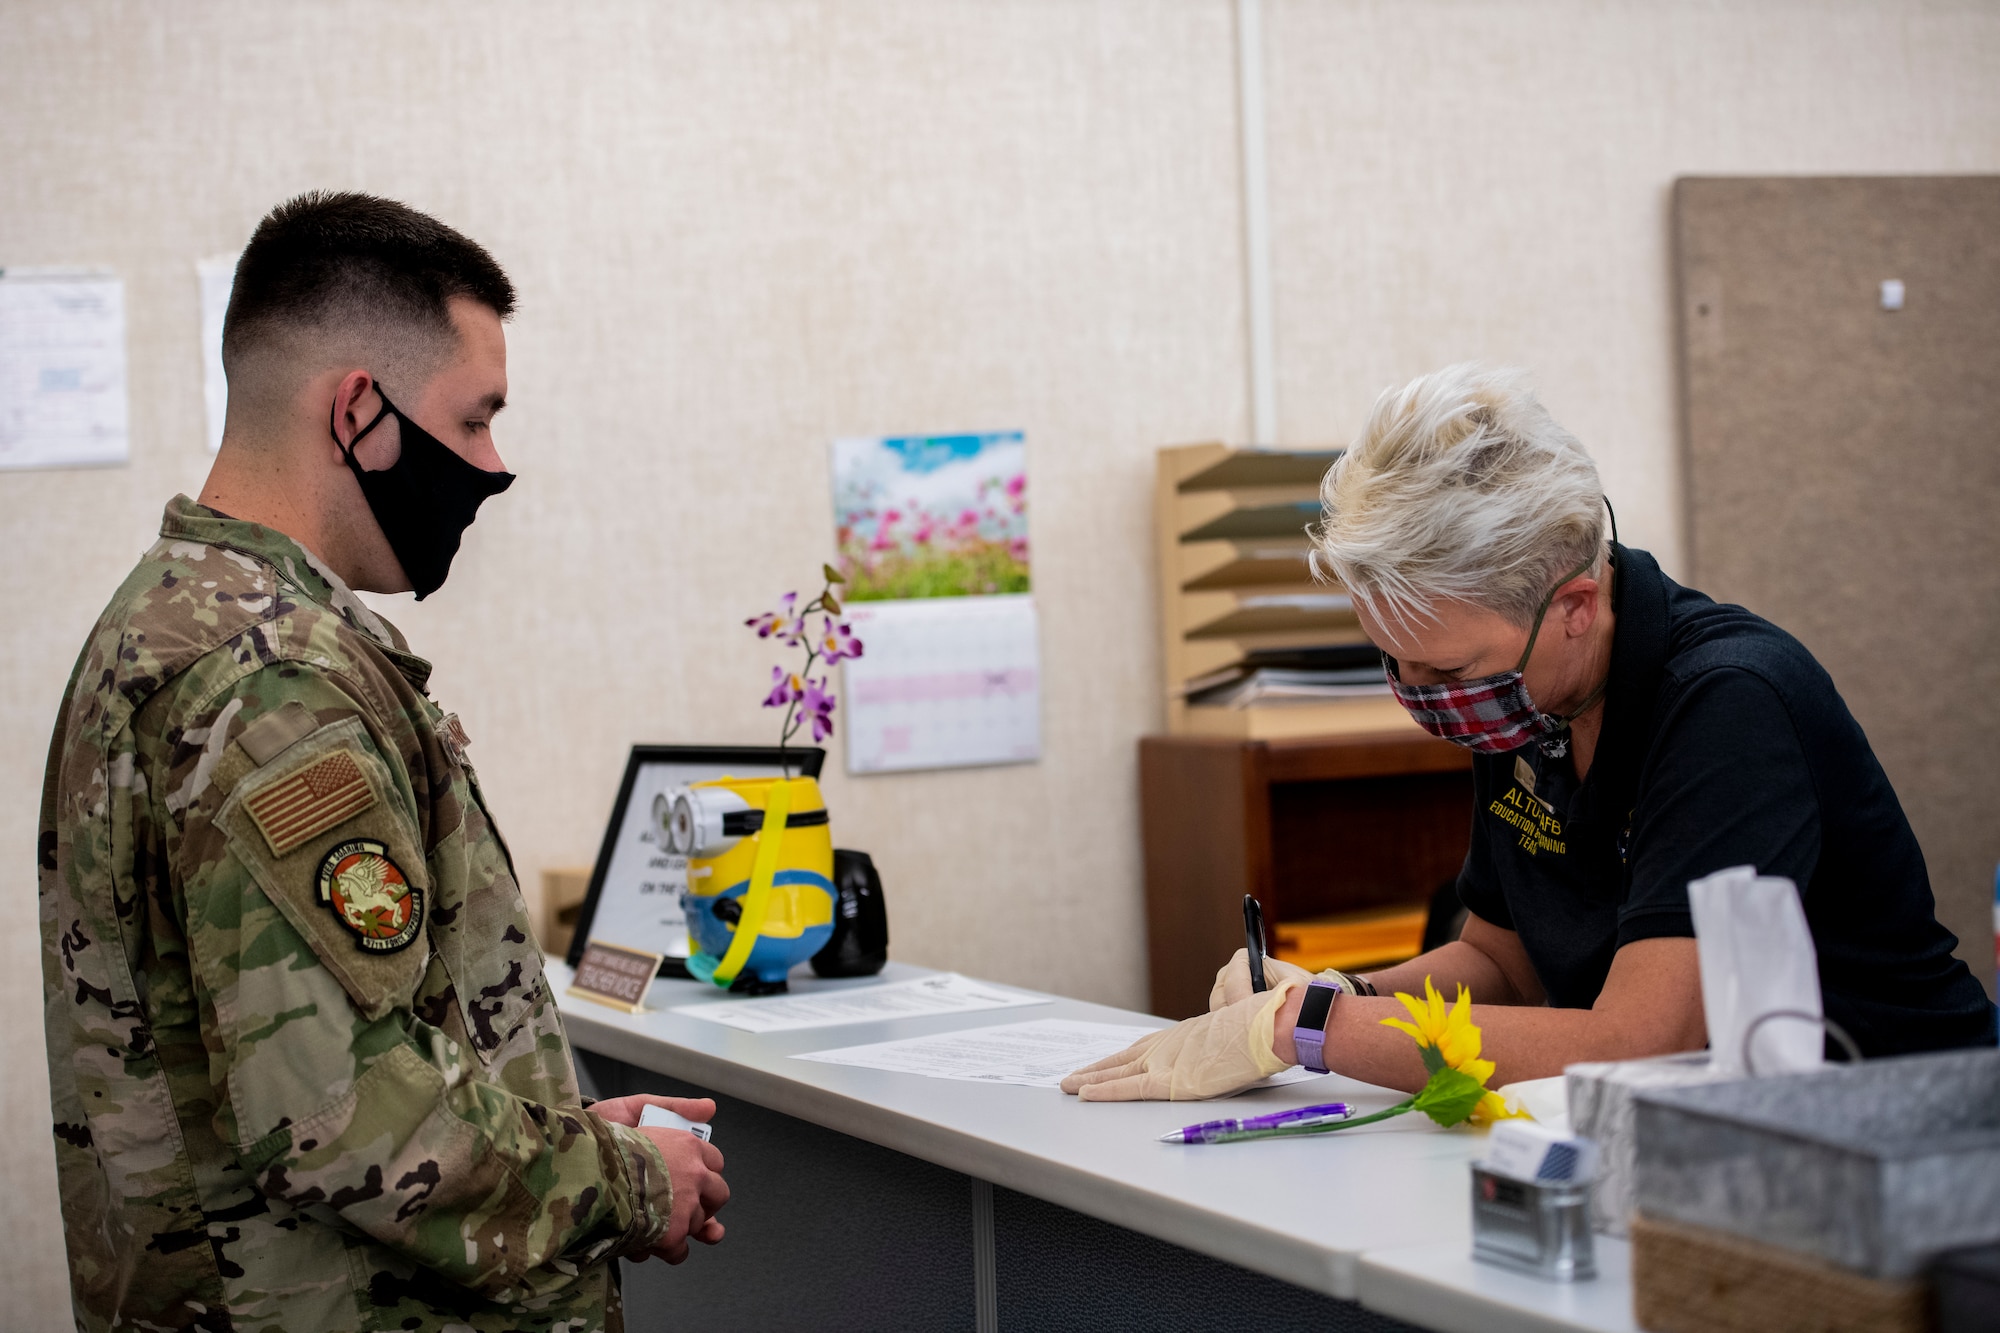 U.S. Air Force Senior Airman Cody Cashdollar, assigned to the 97th Force Support Squadron, signs in for promotion testing with Jill Coles, the test control manager assigned to the 97th FSS education center, May 20, 2020 at Altus Air Force Base, Oklahoma.